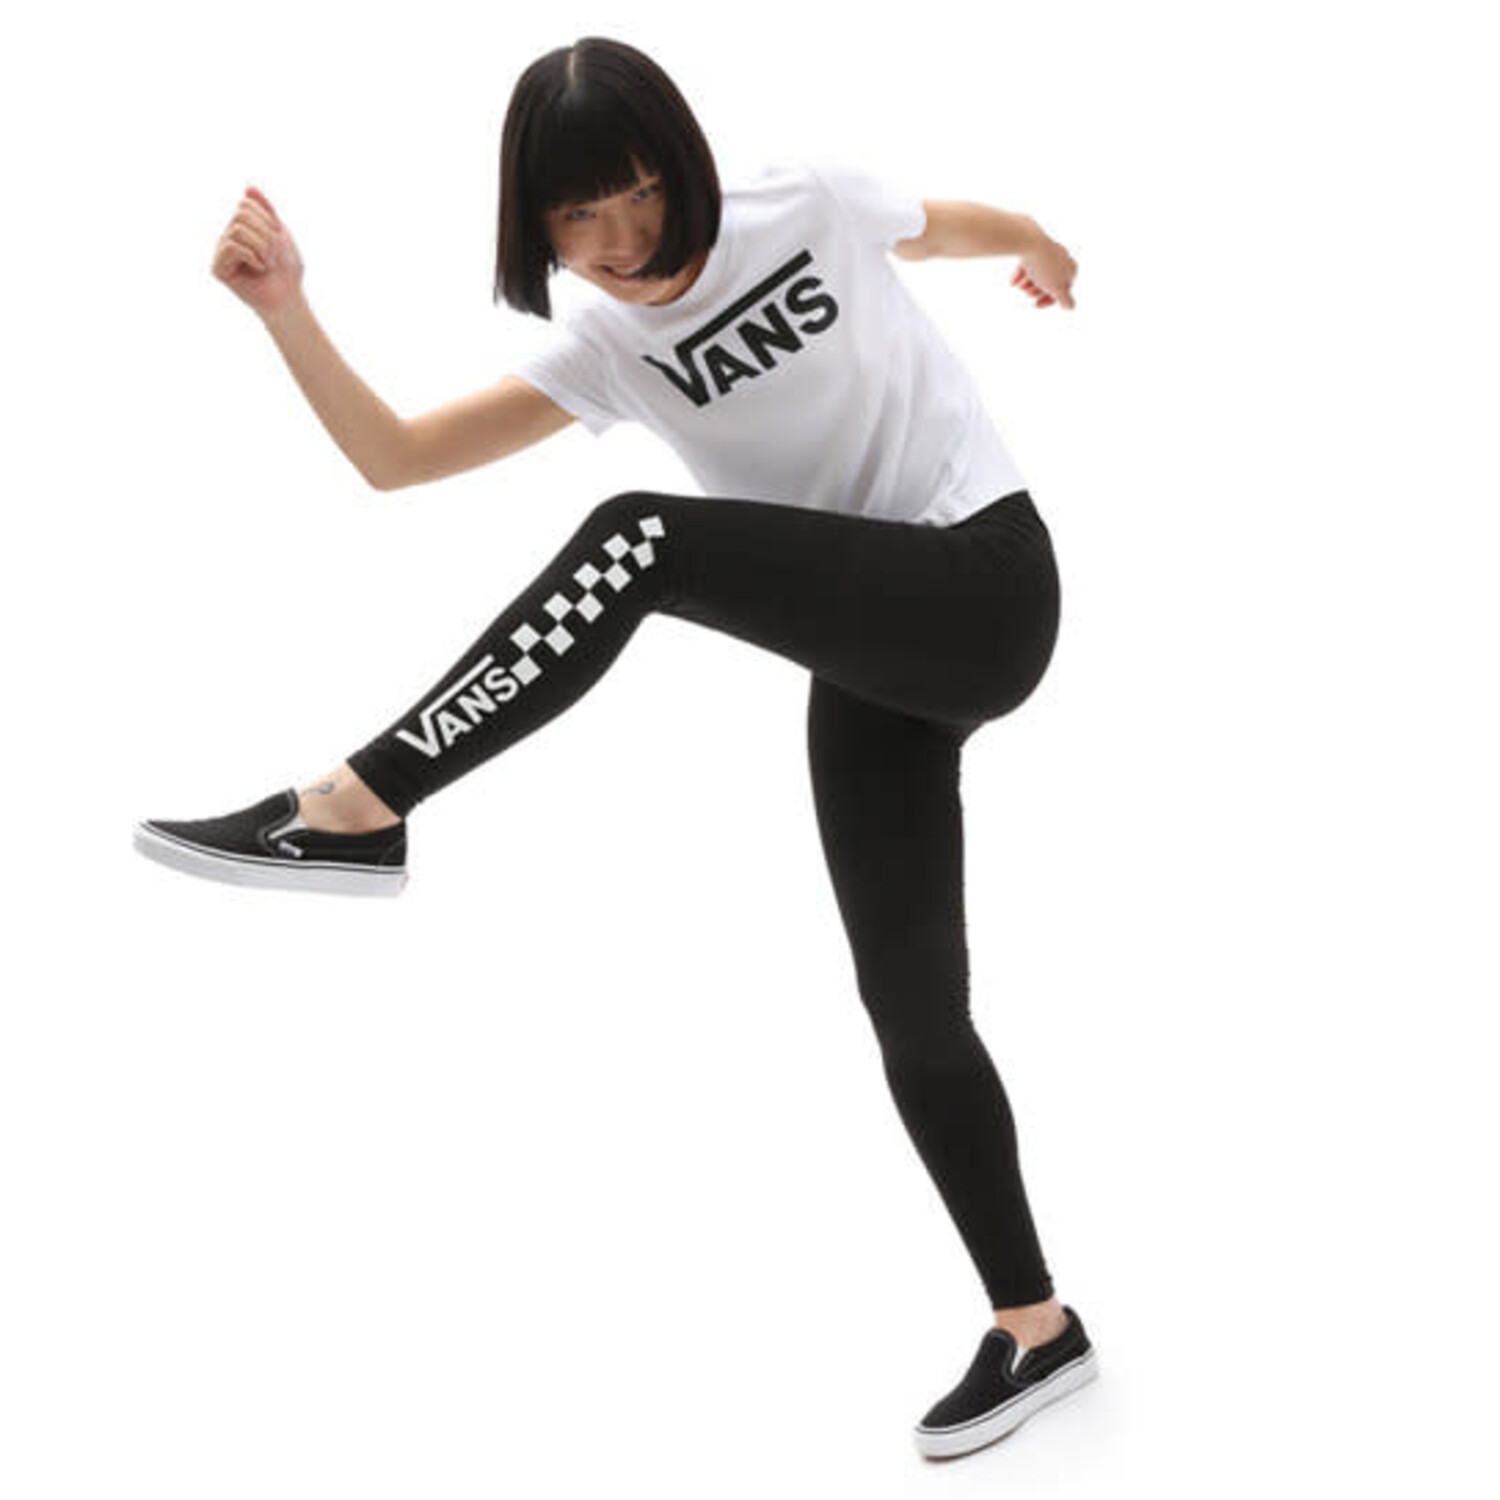 Shes Badas Black White Checkered Leggings Women's Vans Classic Skater Style  / Racing Pattern Stretchy Pants / Cute Soft Fashion Tights -  Norway